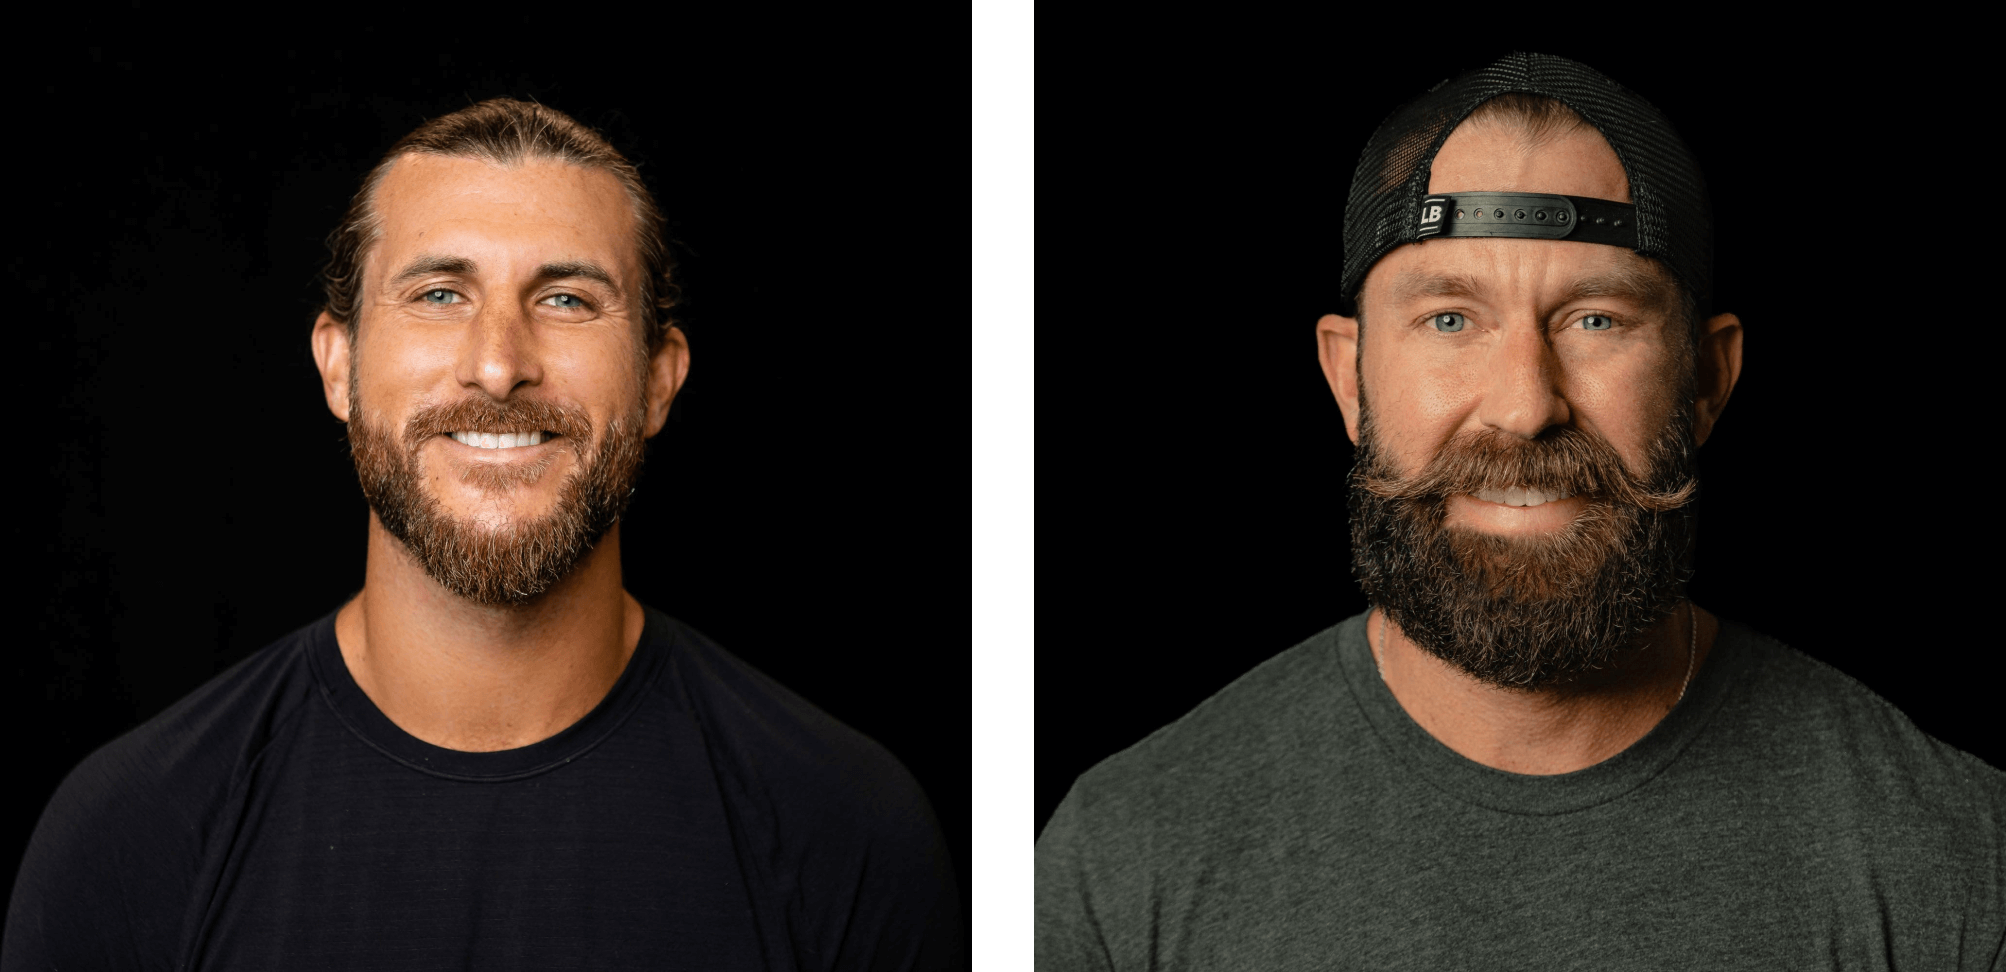 Side-by-side headshots of the Live Bearded founders Anthony Mink and Spencer Davis. They are smiling in front of a black backdrop, and both of them have beards and mustaches. 